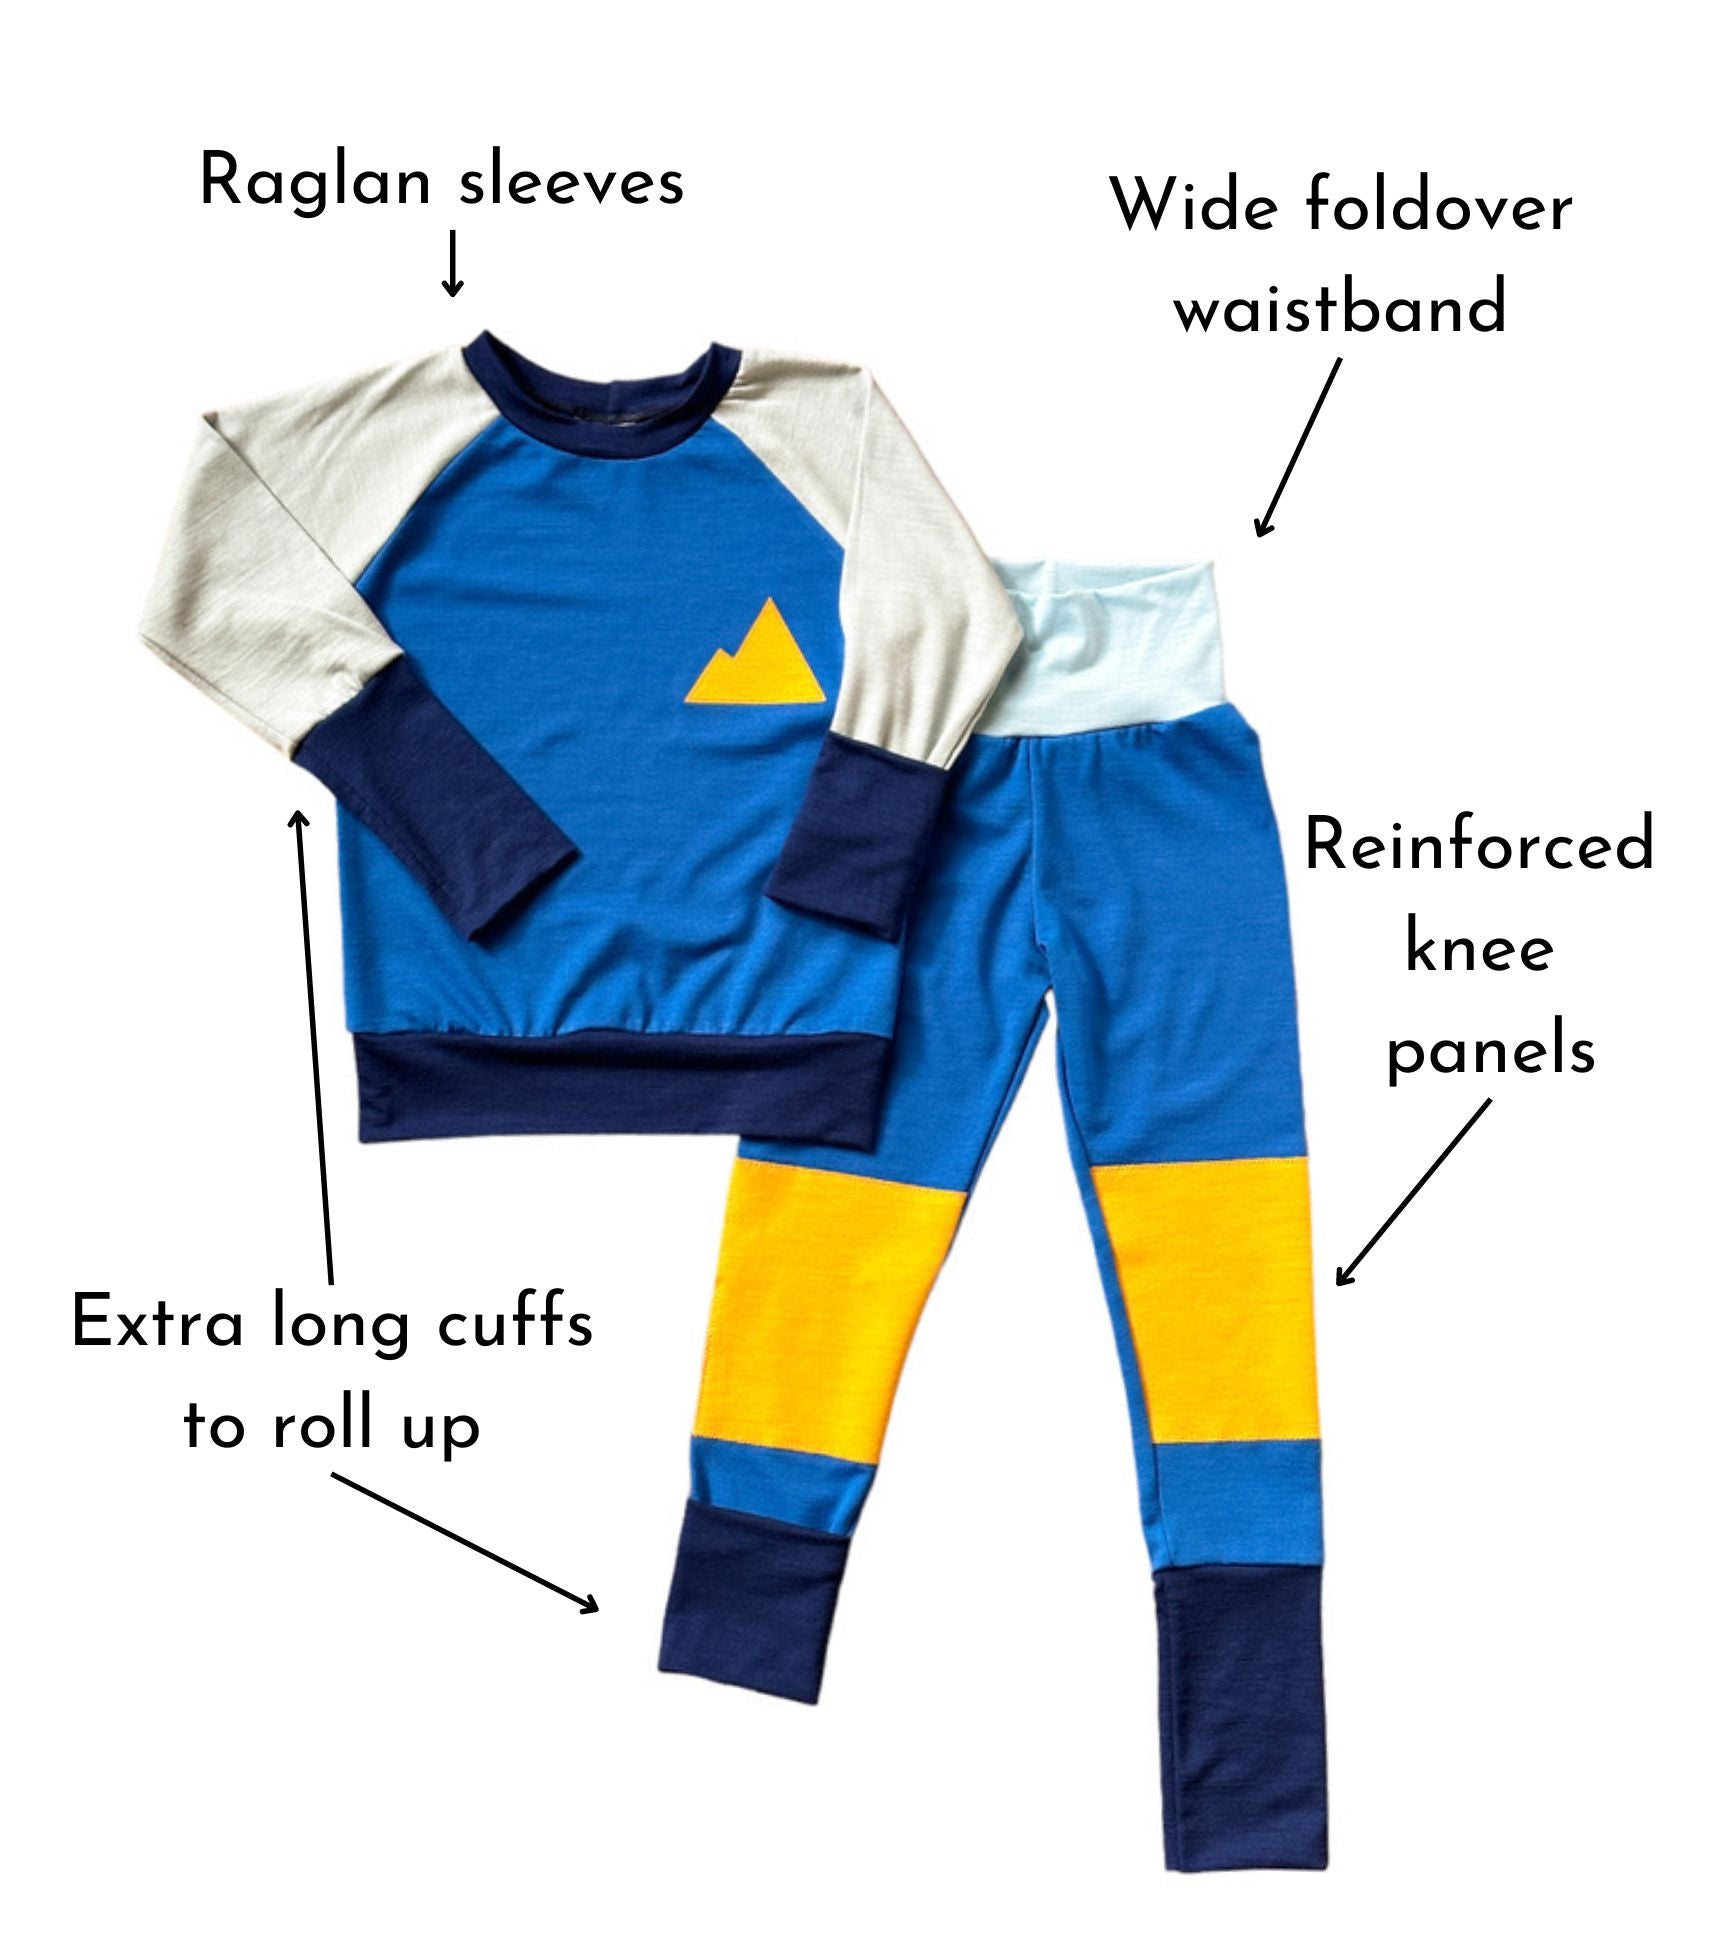 Grow-with-me features for Children's Merino Wool Base Layers from Wildhaven Wools